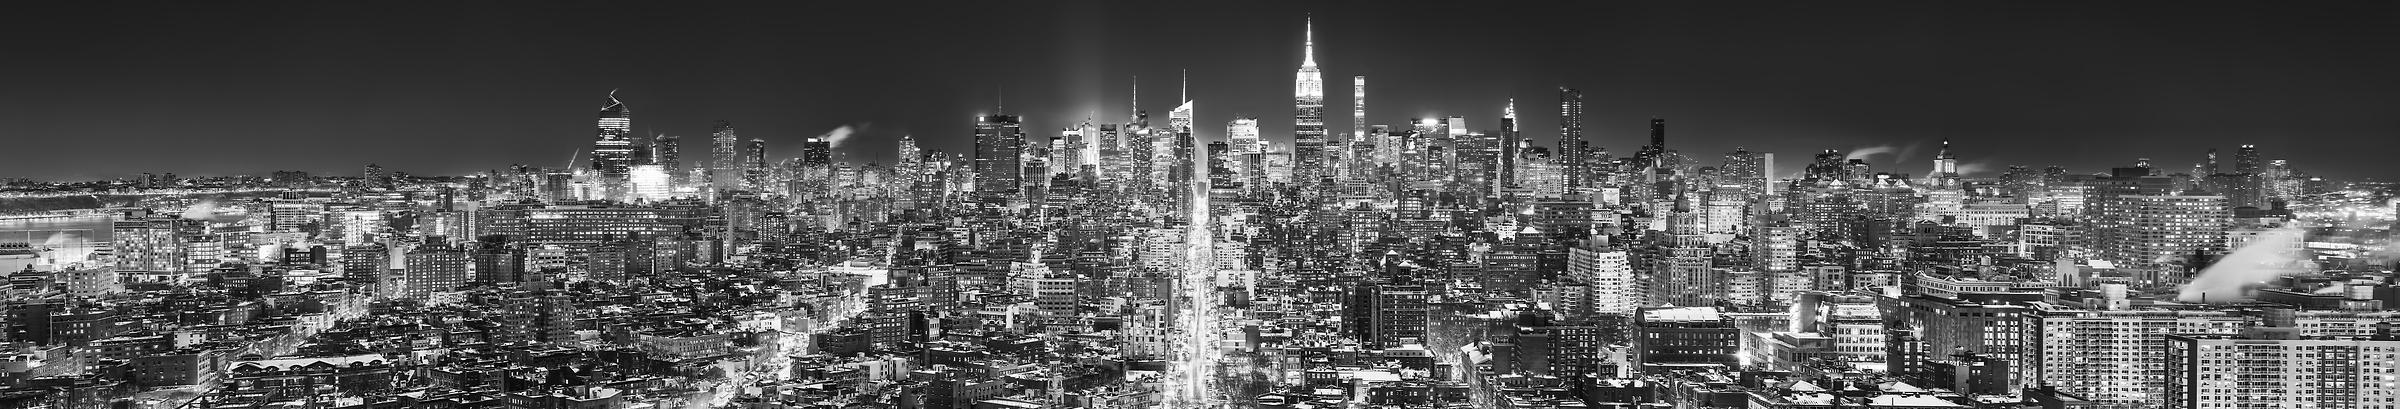 4,636 megapixels! A very high resolution, large-format VAST photo print of the Manhattan NYC skyline in winter snow at night; black and white cityscape fine art photo created by Dan Piech in New York City.